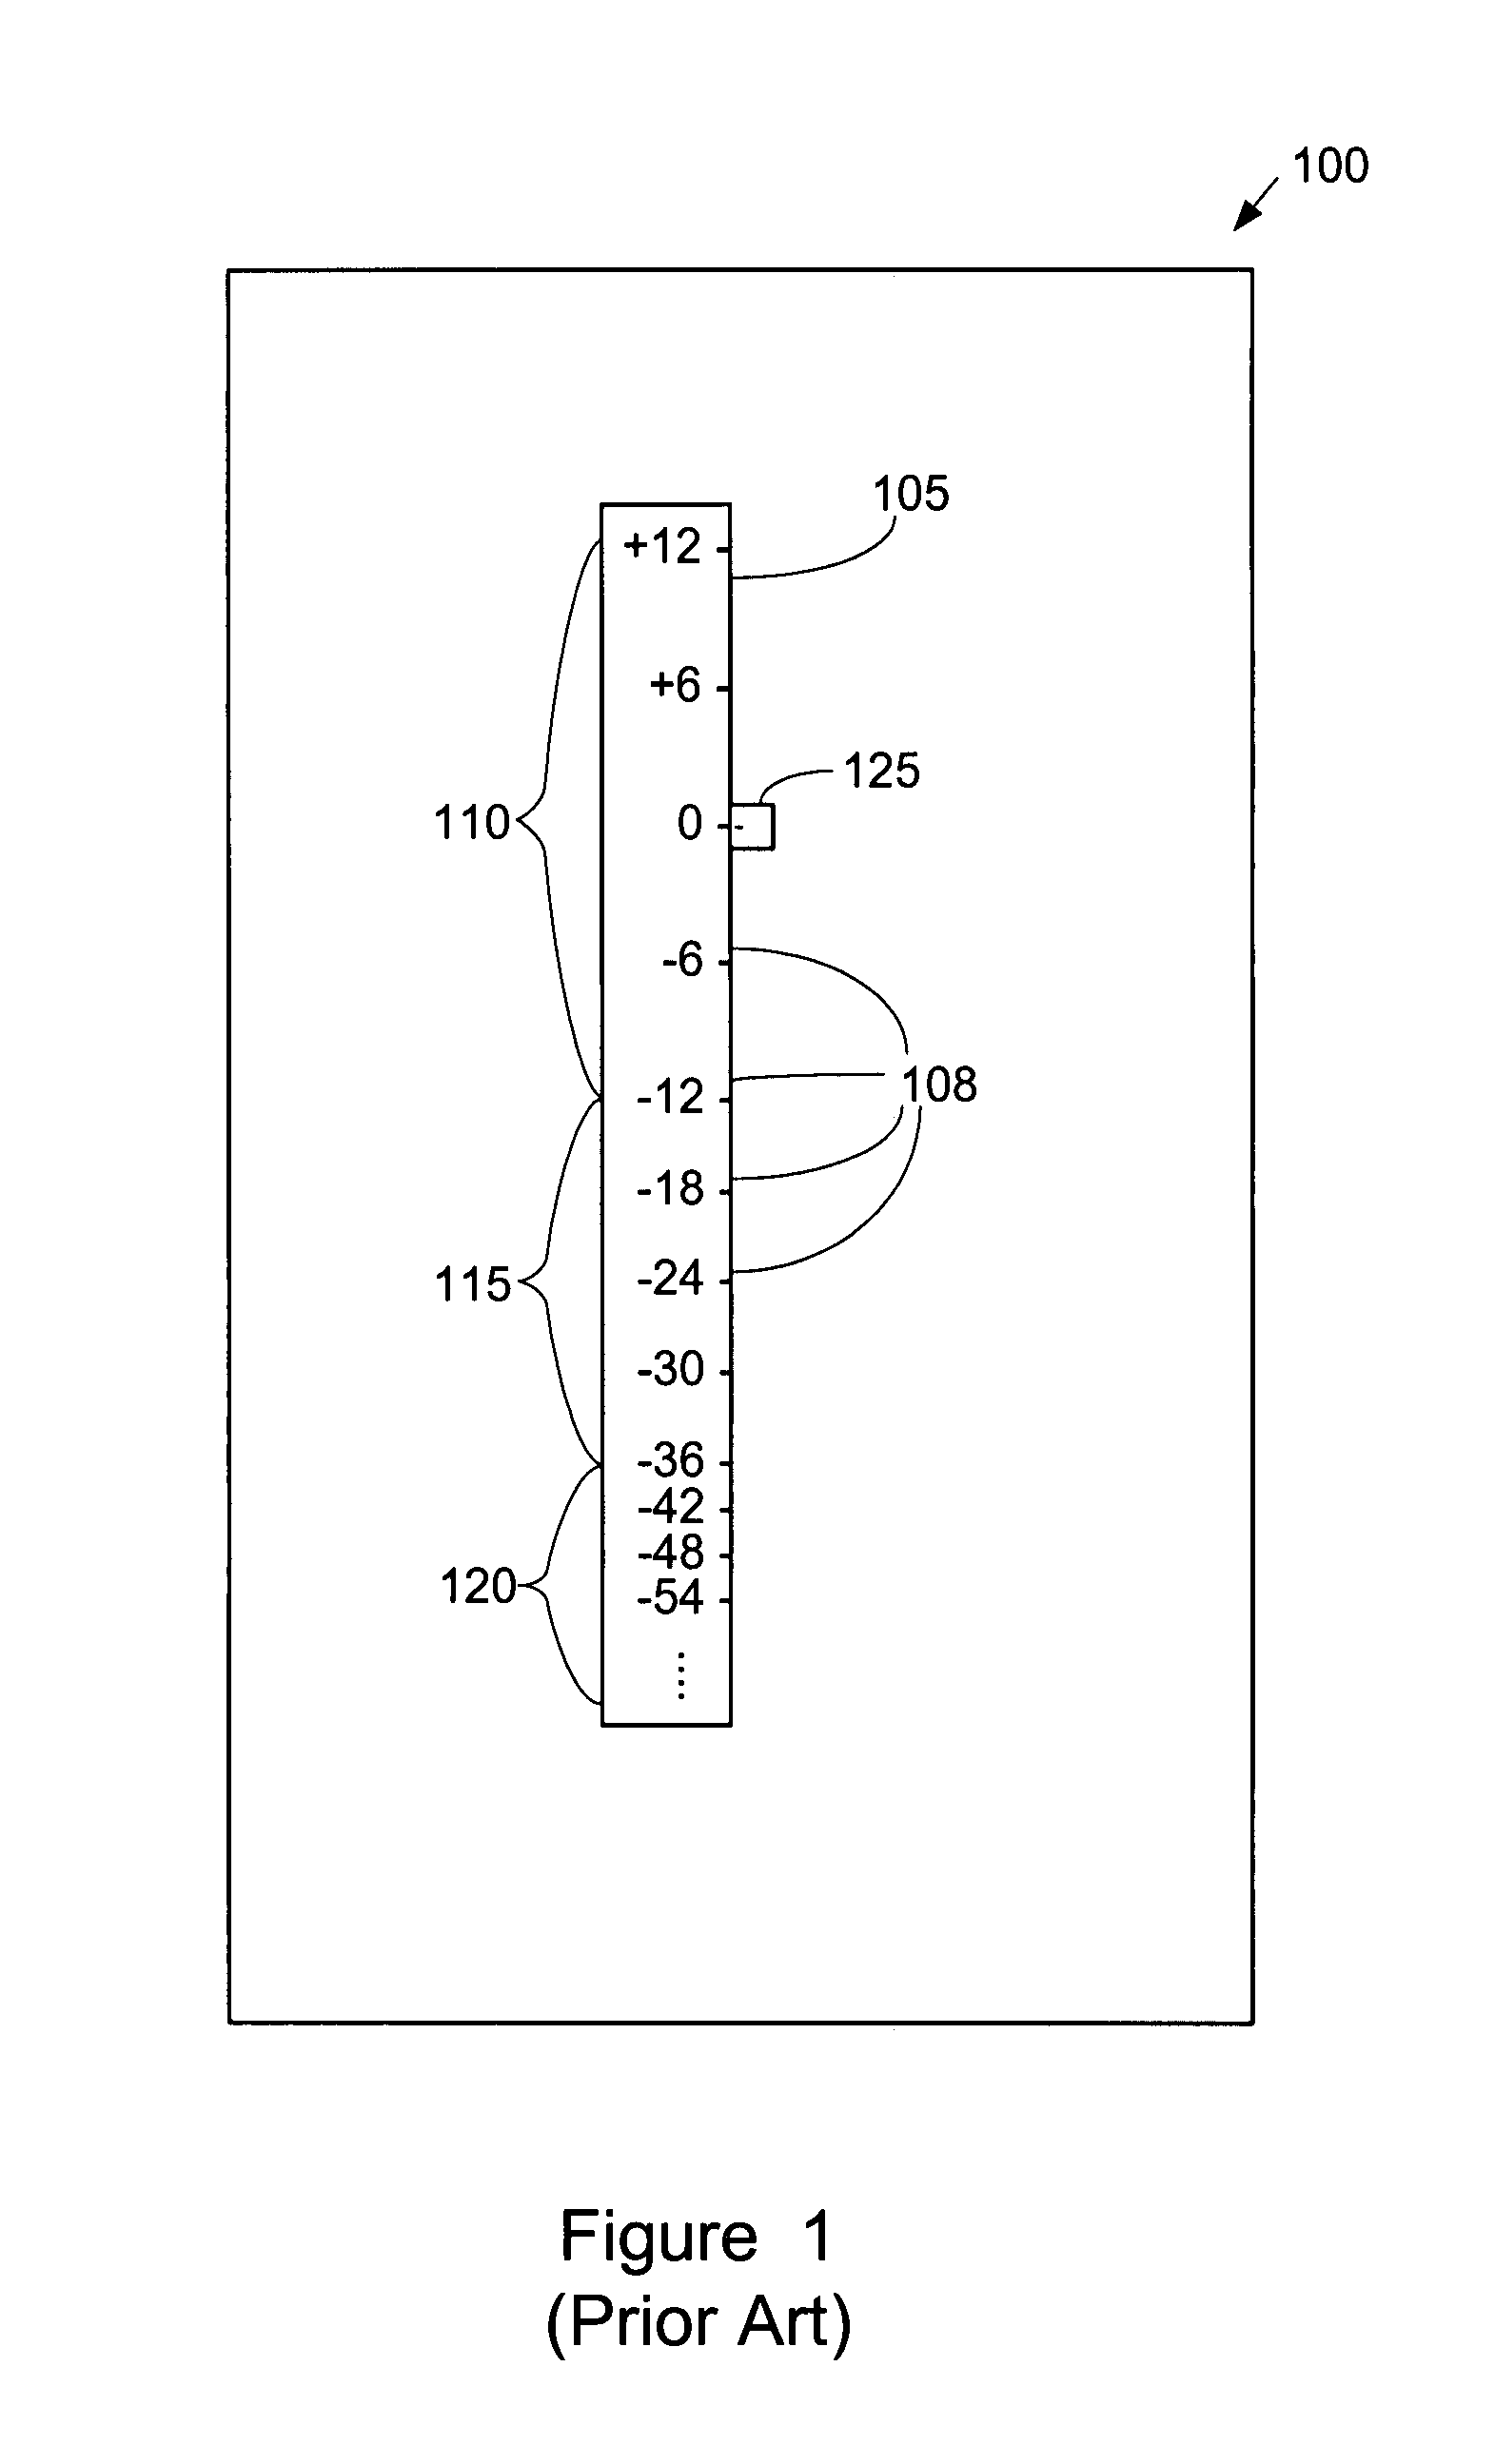 Method and apparatus for displaying a gain control interface with non-linear gain levels